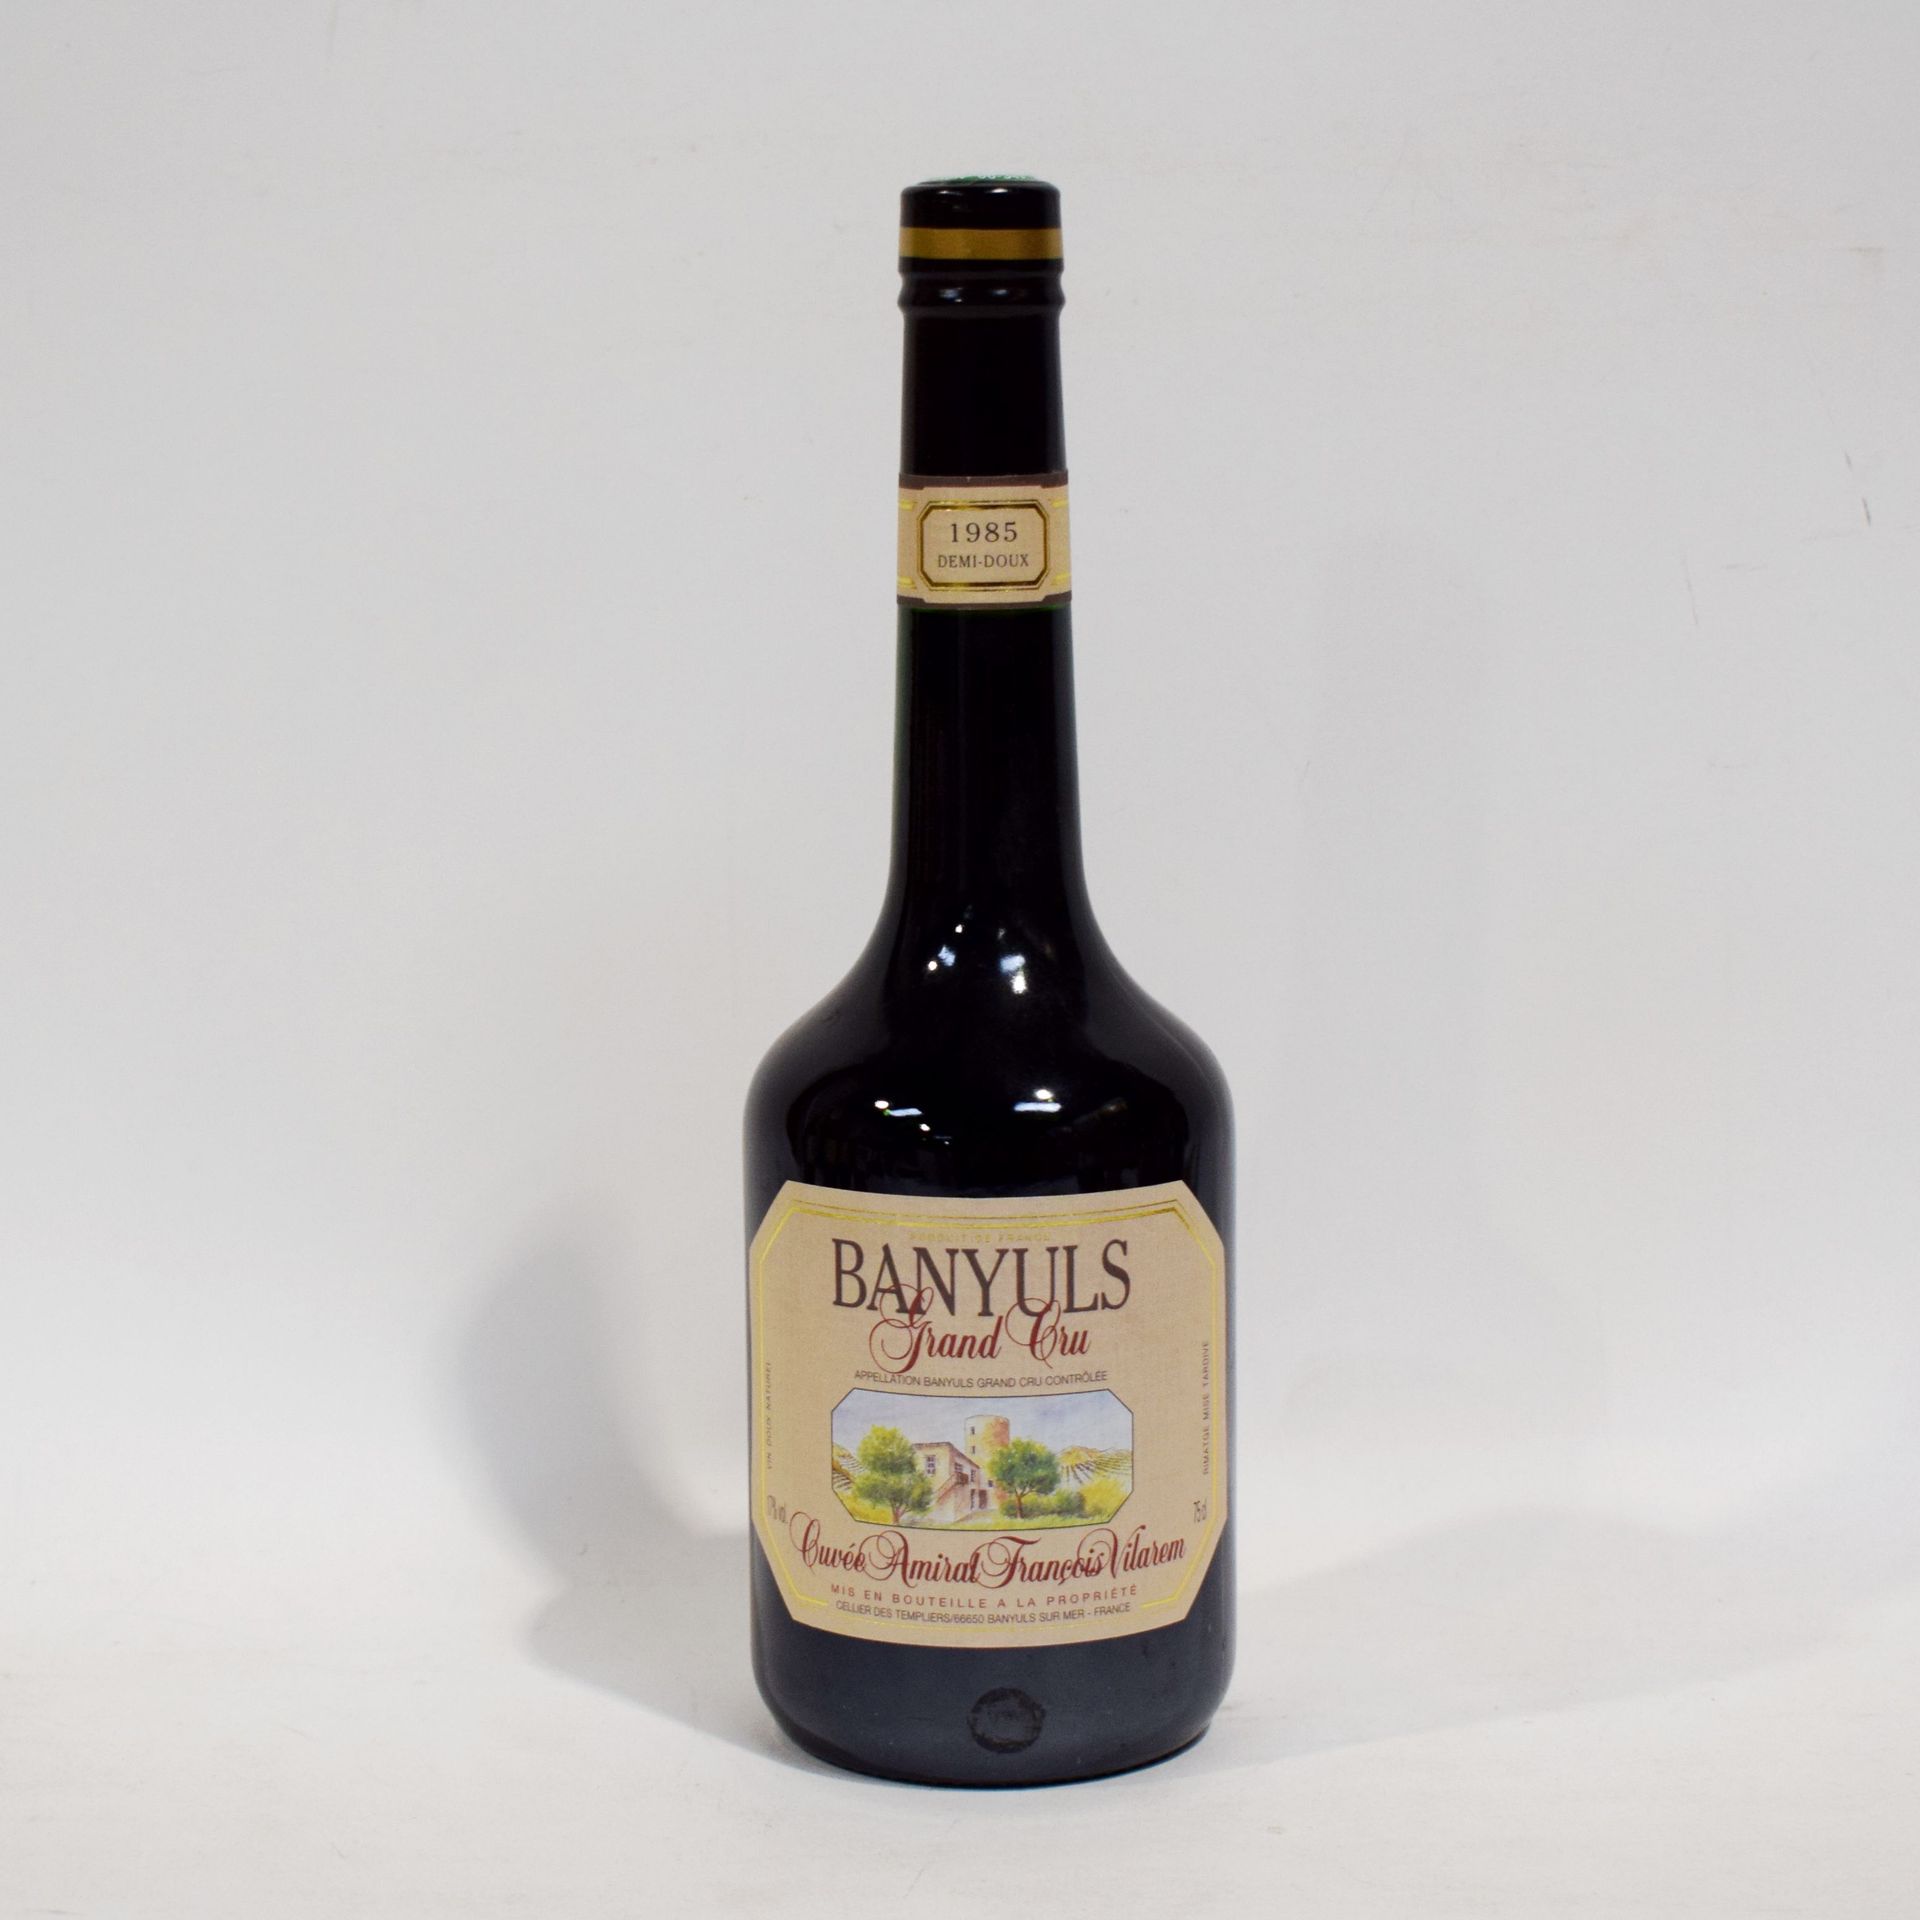 Null (BANYULS) Flasche Banyuls Grand Cru, Cellier des templiers, Cuvée Amiral Fr&hellip;